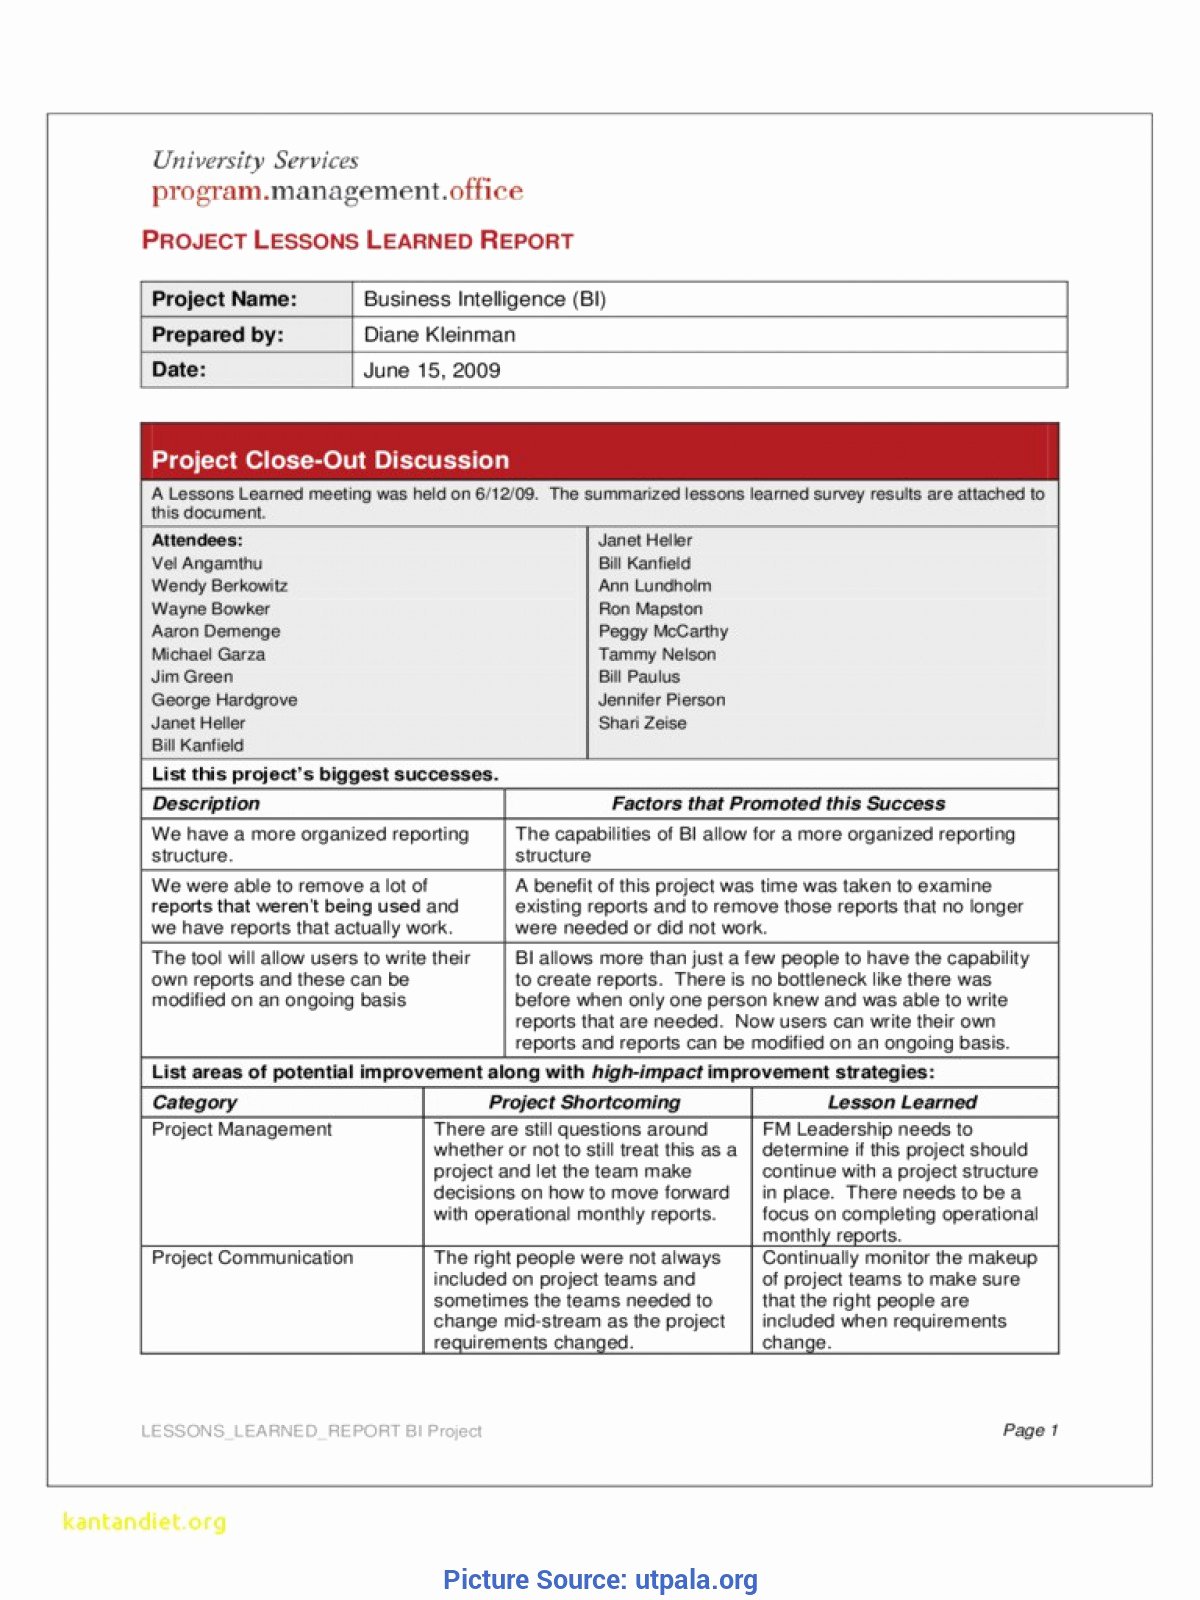 Lessons Learned Document Template Inspirational Trending Lessons Learned Document Management Lovely